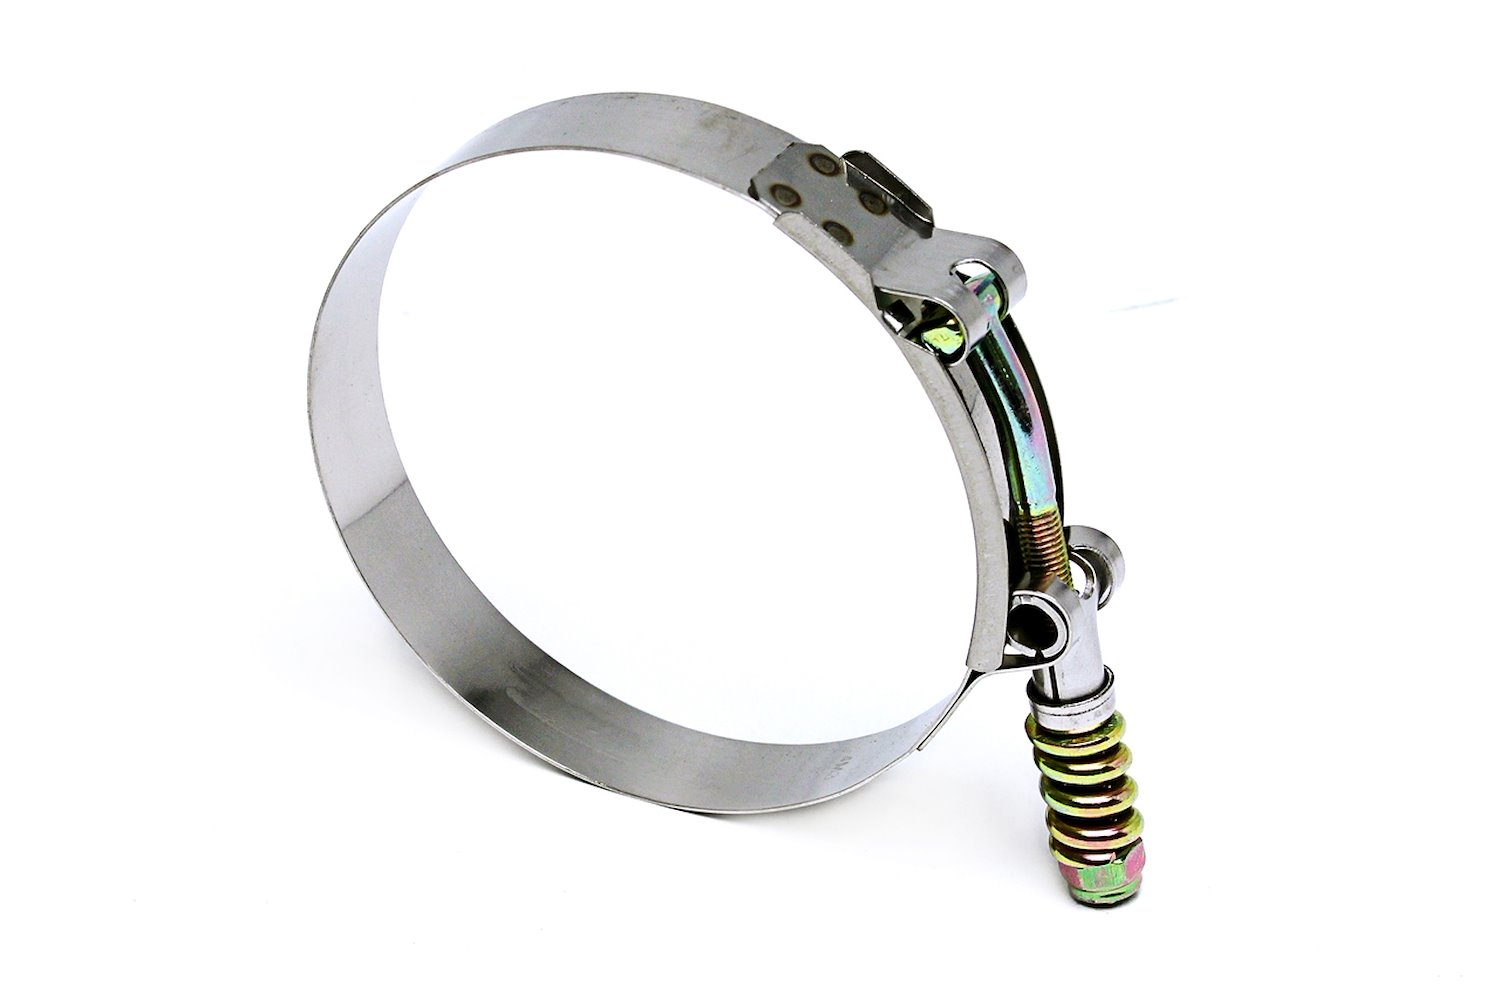 SLTC-287 Stainless Steel Spring Loaded T-Bolt Hose Clamp, Size #64, Range: 2.87 in.-3.19 in.